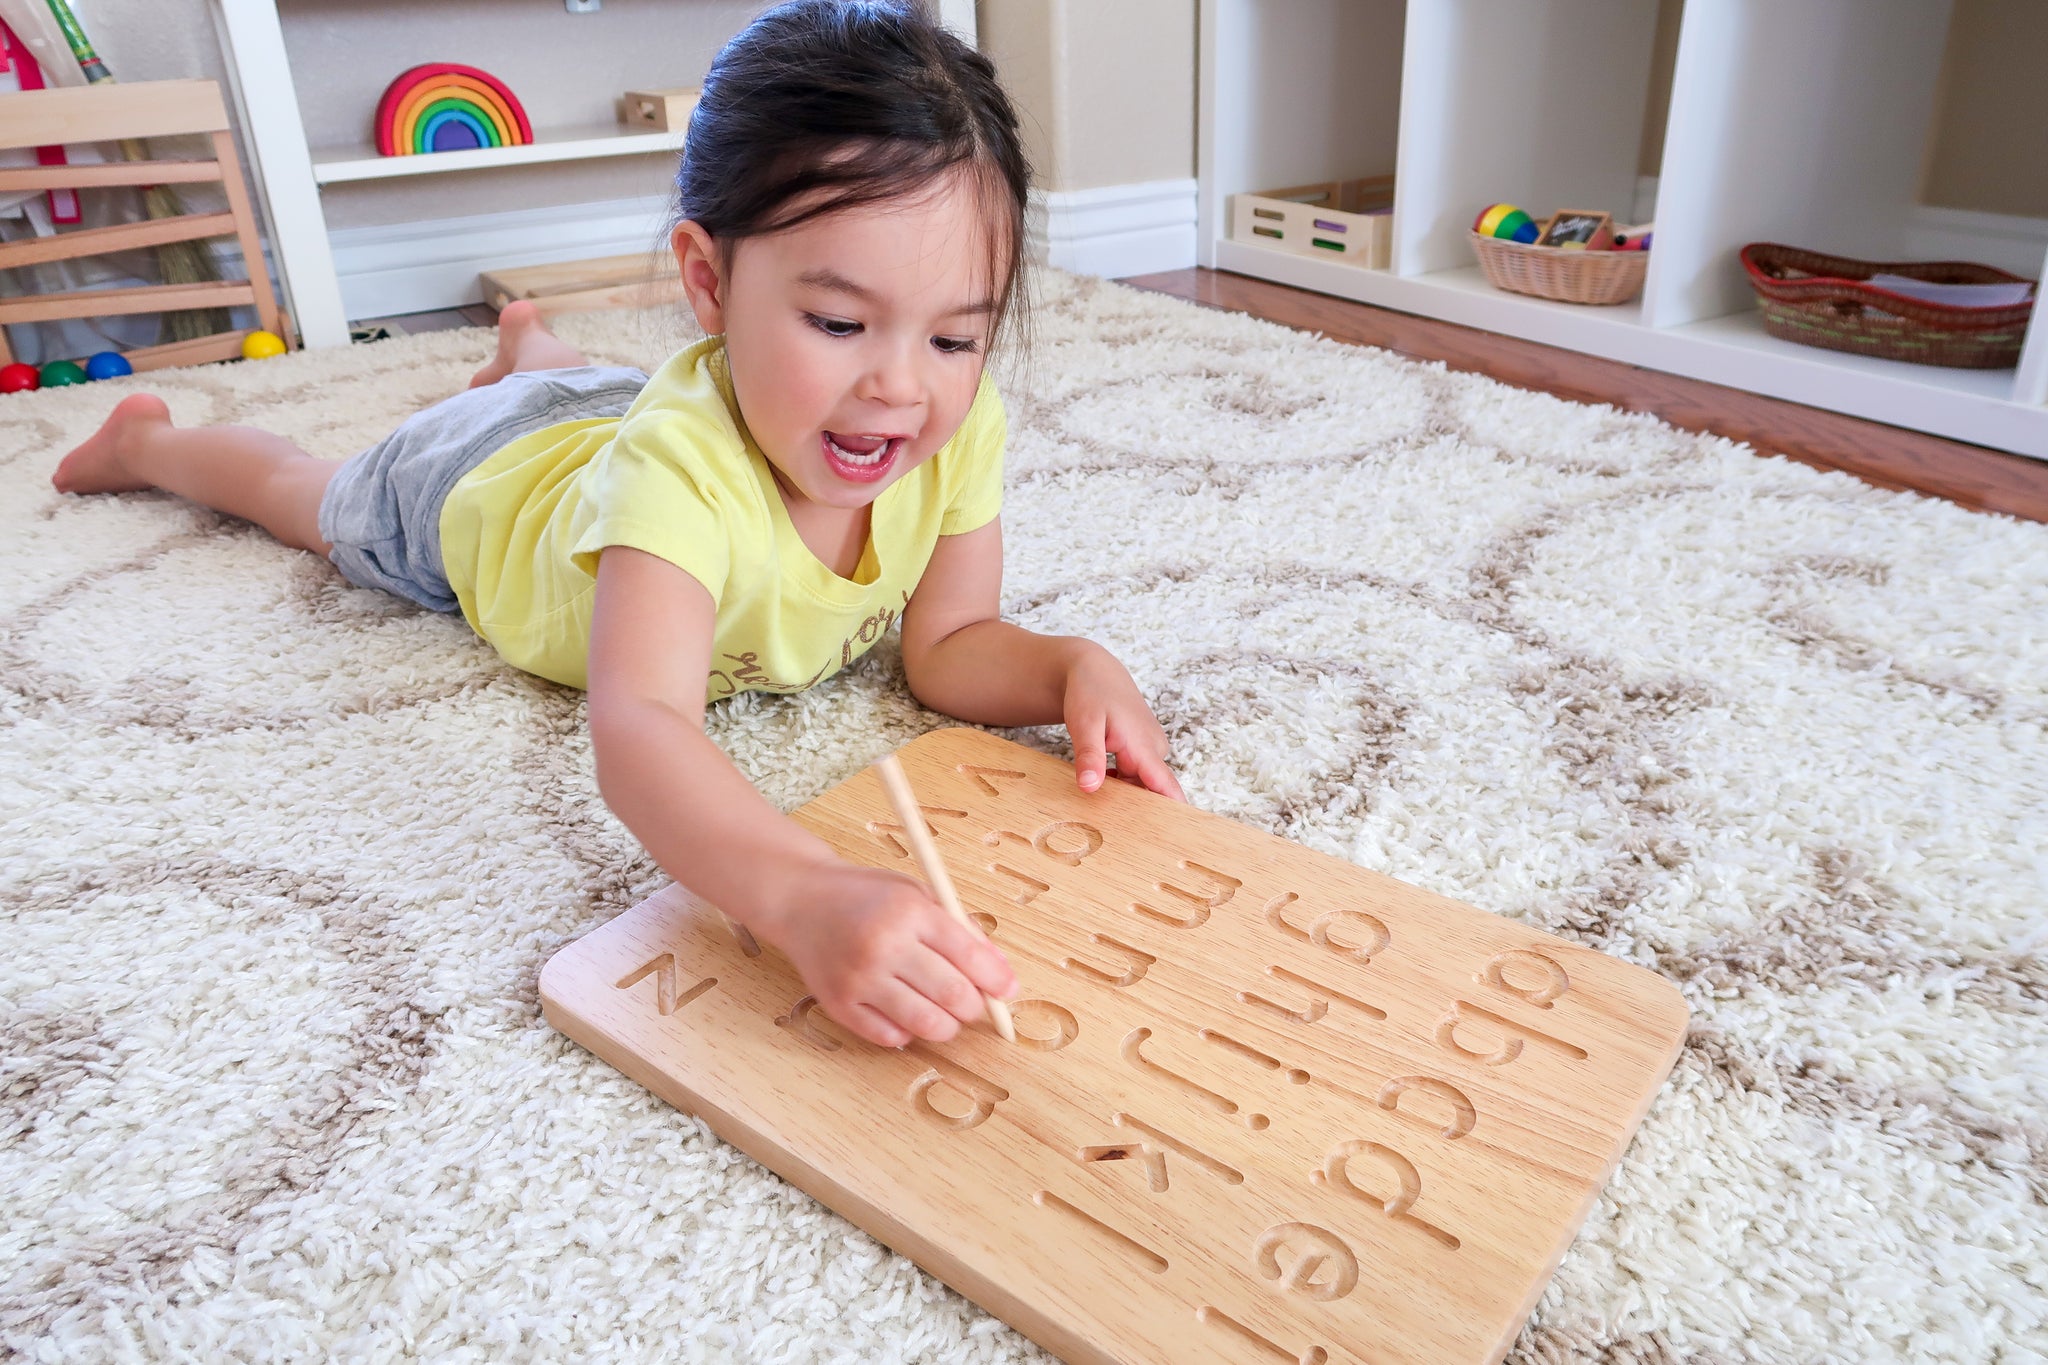 Kidodido Wooden Tracing Board for Toddlers